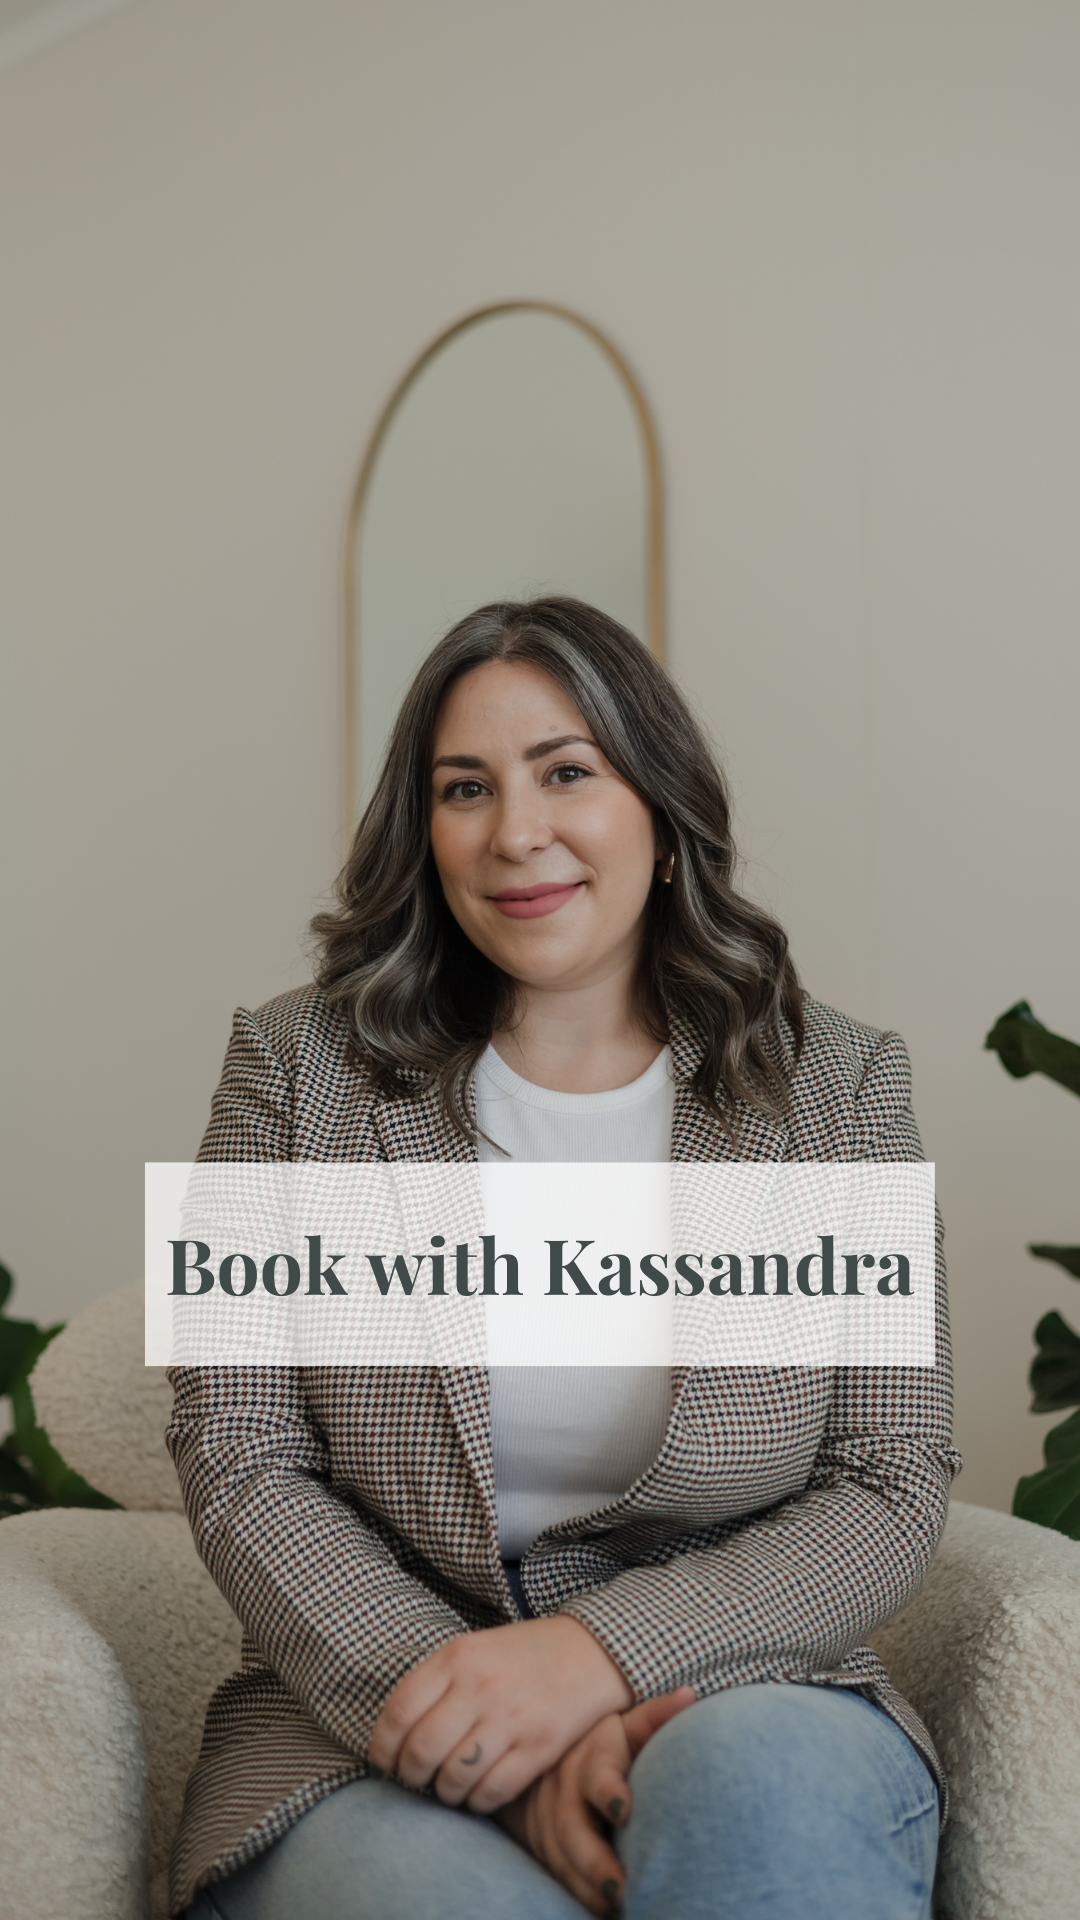 Kassandra Heap, experienced psychologist at Attached Counselling Co. in Calgary, click to book your appointment now.